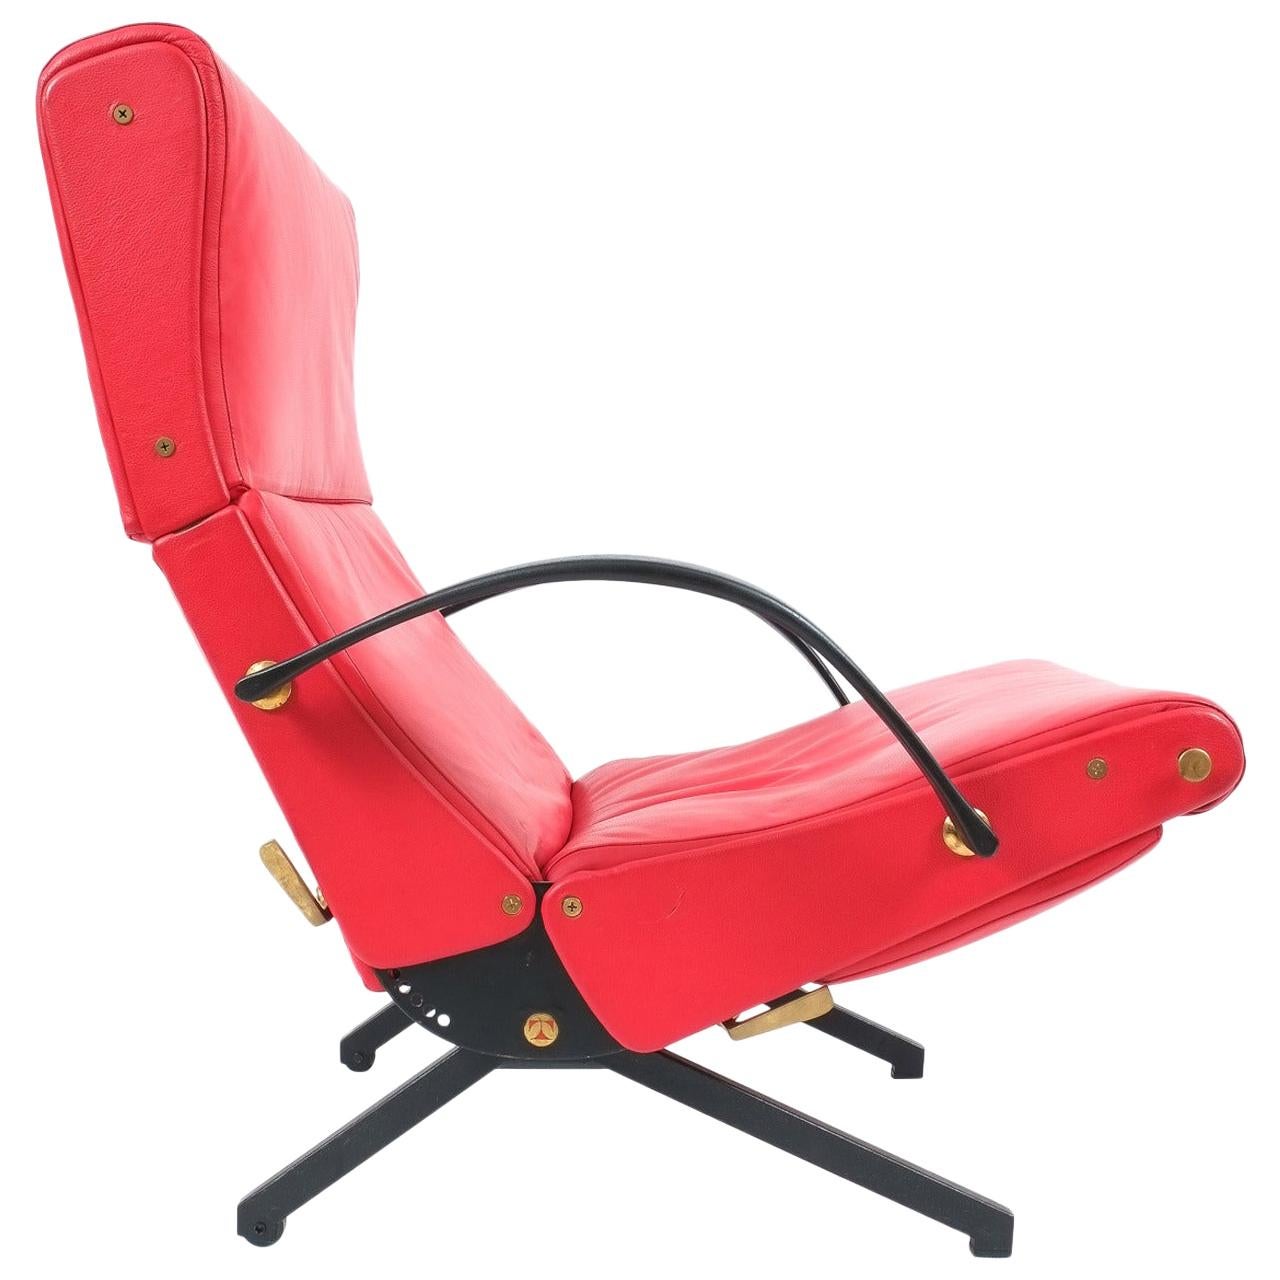 Osvaldo Borsani P40 Relaxing Leather Armchair Red Leather, Tecta, 1950, Italy For Sale 4